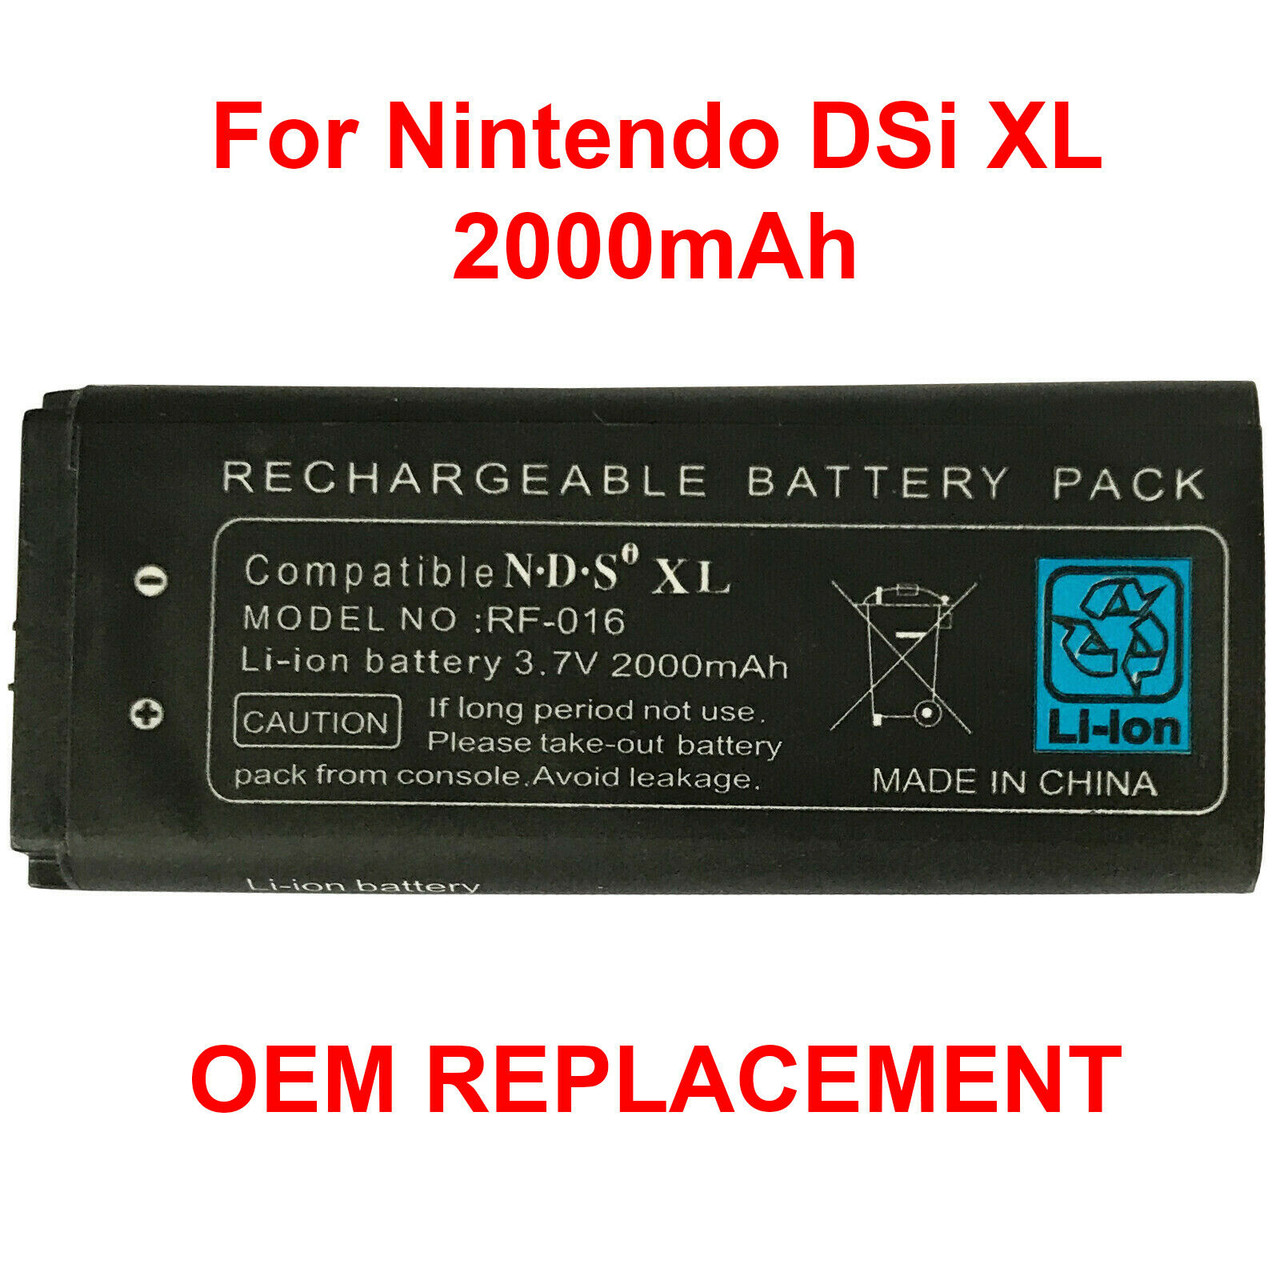 OEM New Battery Replacement Pack For Nintendo DSi XL 2000mAh 3.7V Rechargeable